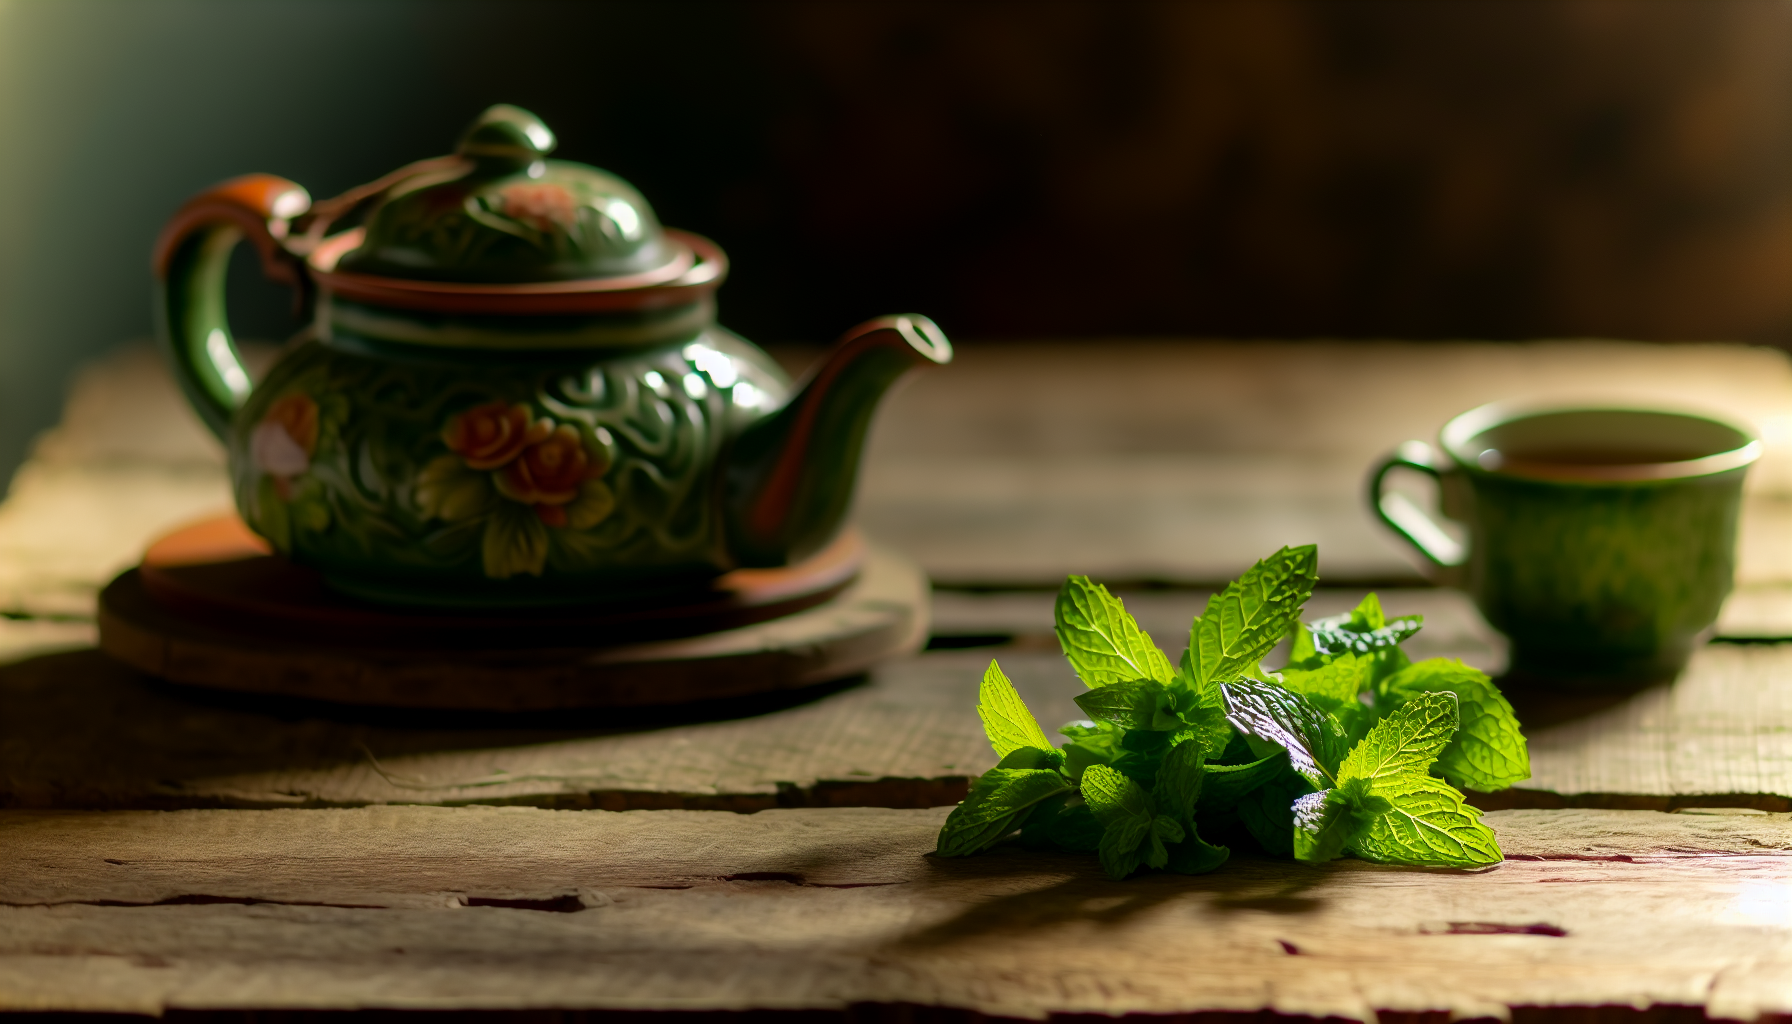 Peppermint leaves and a teapot